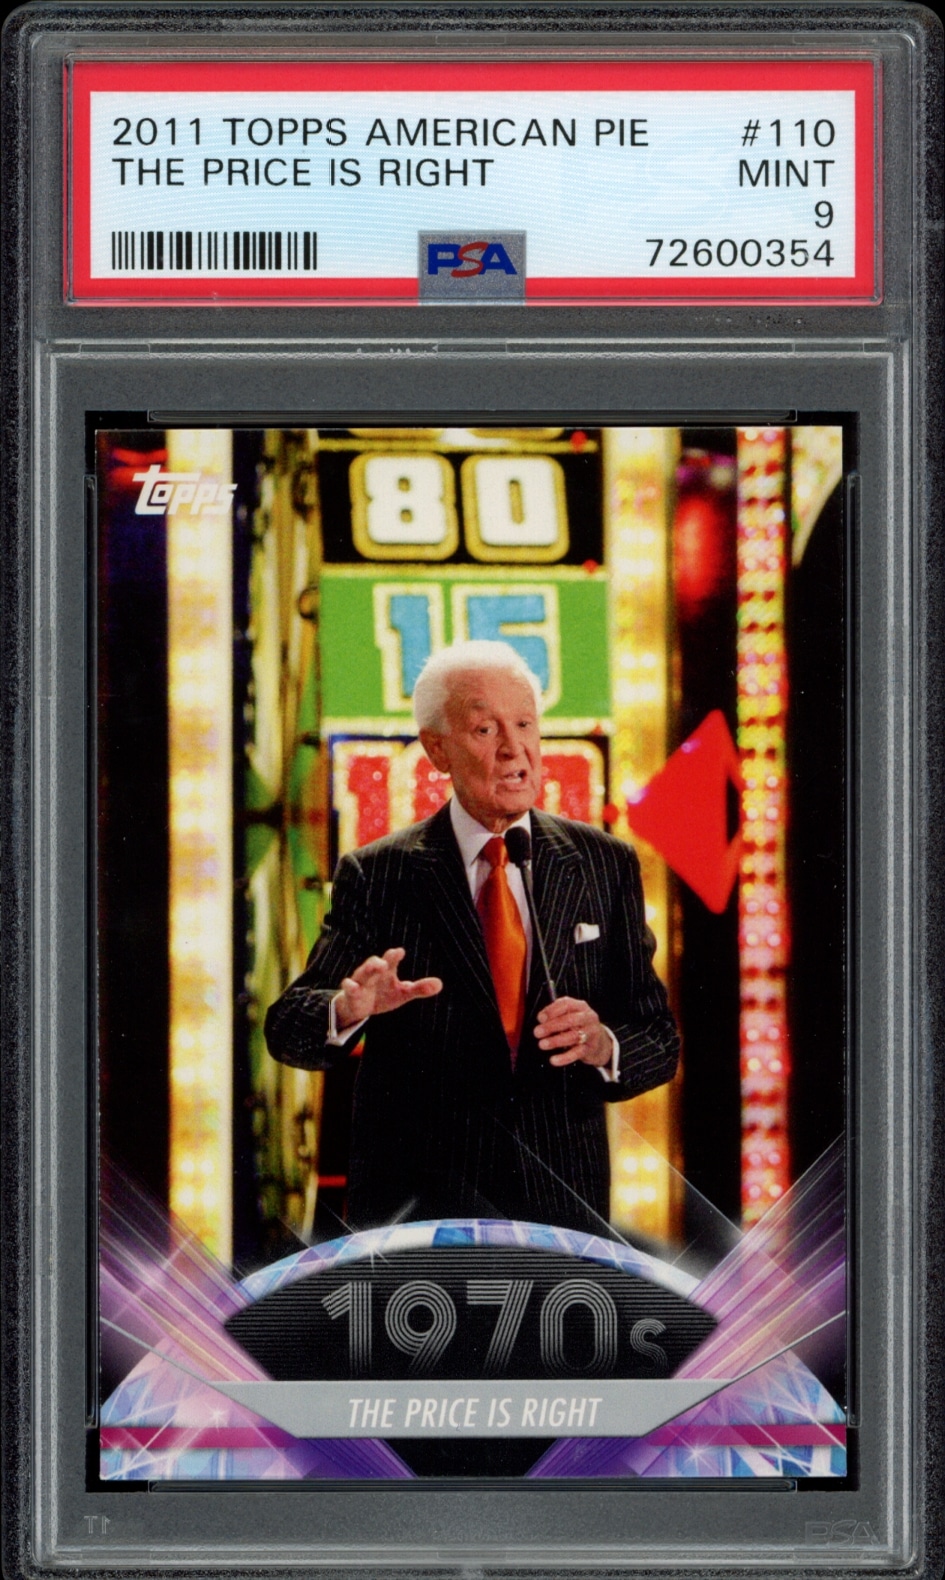 Mint condition 2011 Topps American Pie card of The Price is Right, graded 9 by PSA.